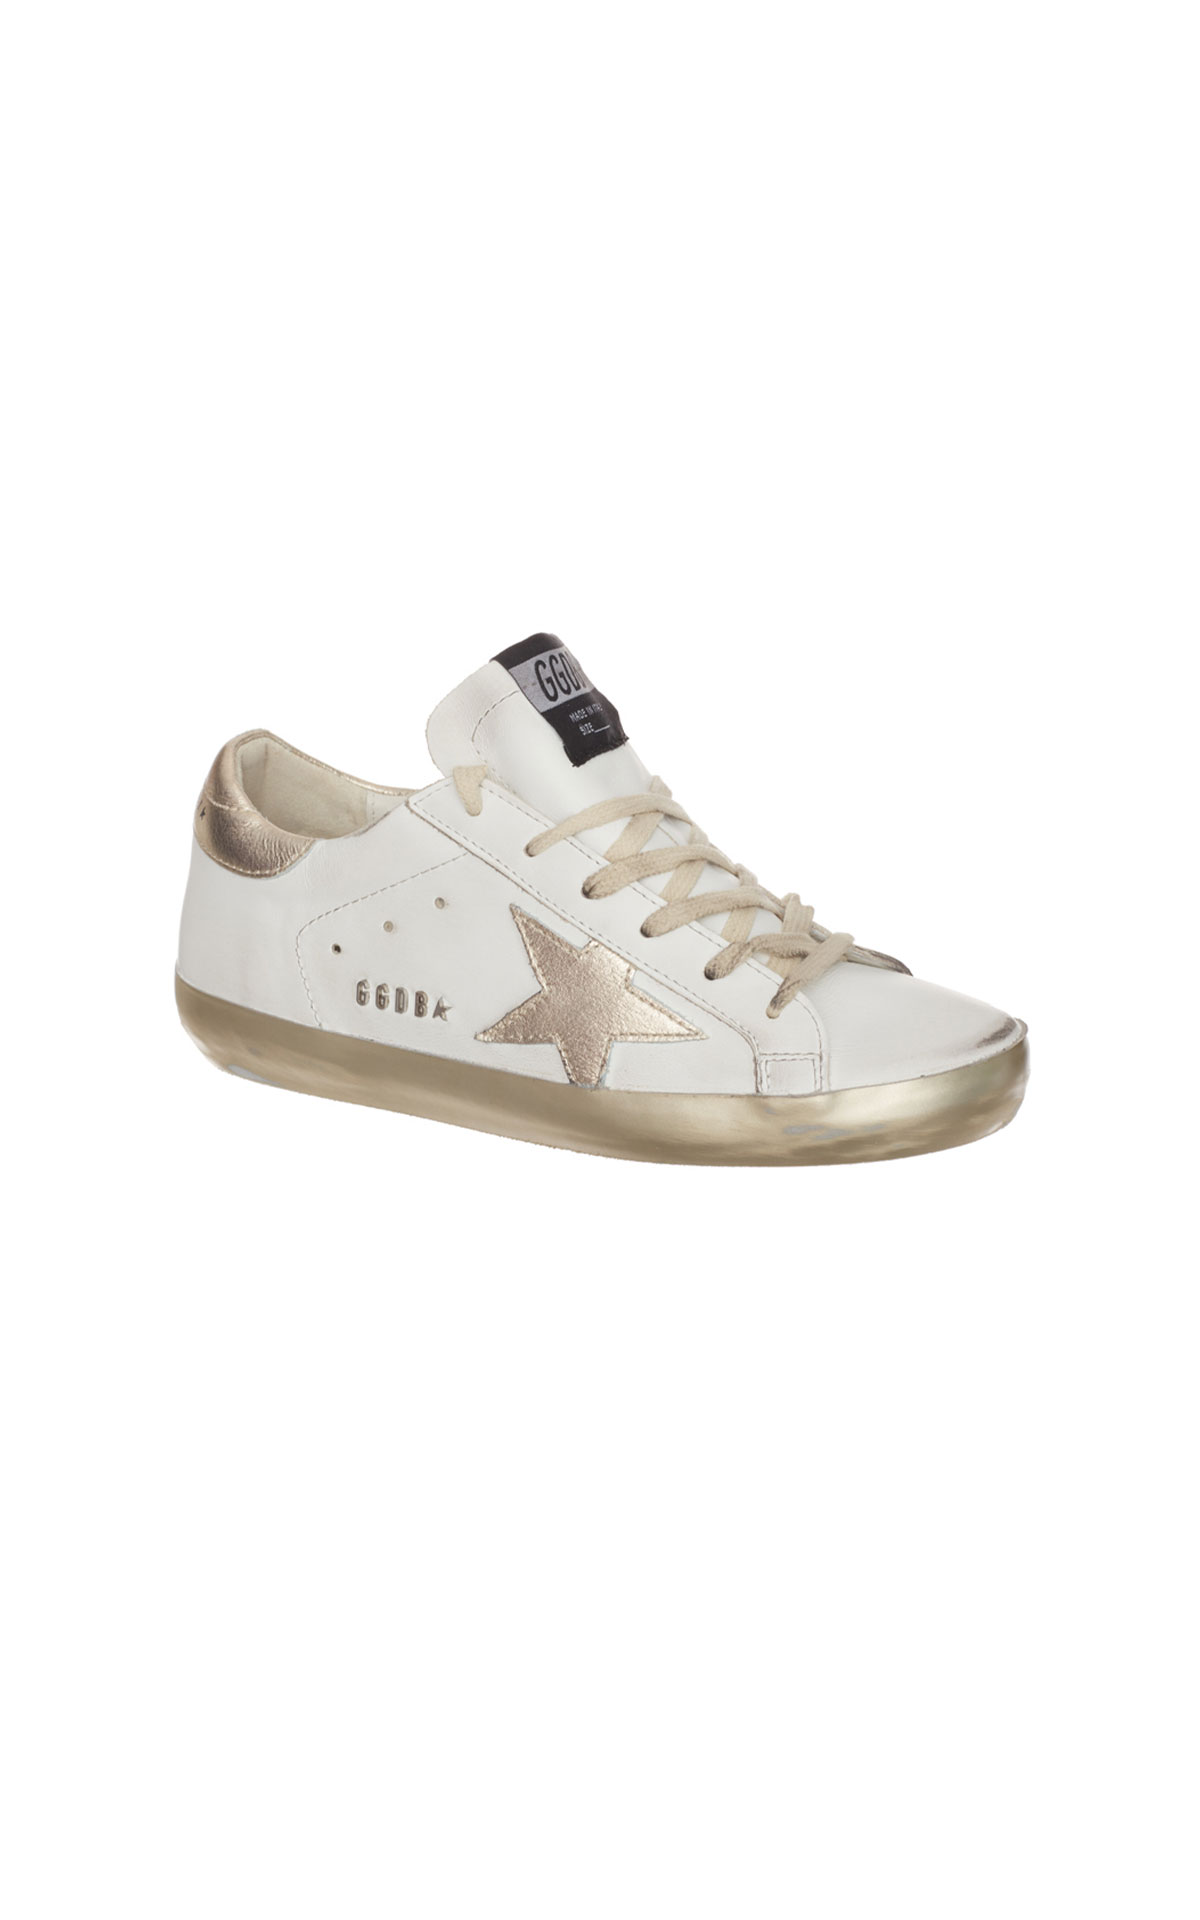 Golden Goose Superstar sneakers with gold sparkle foxing from Bicester Village